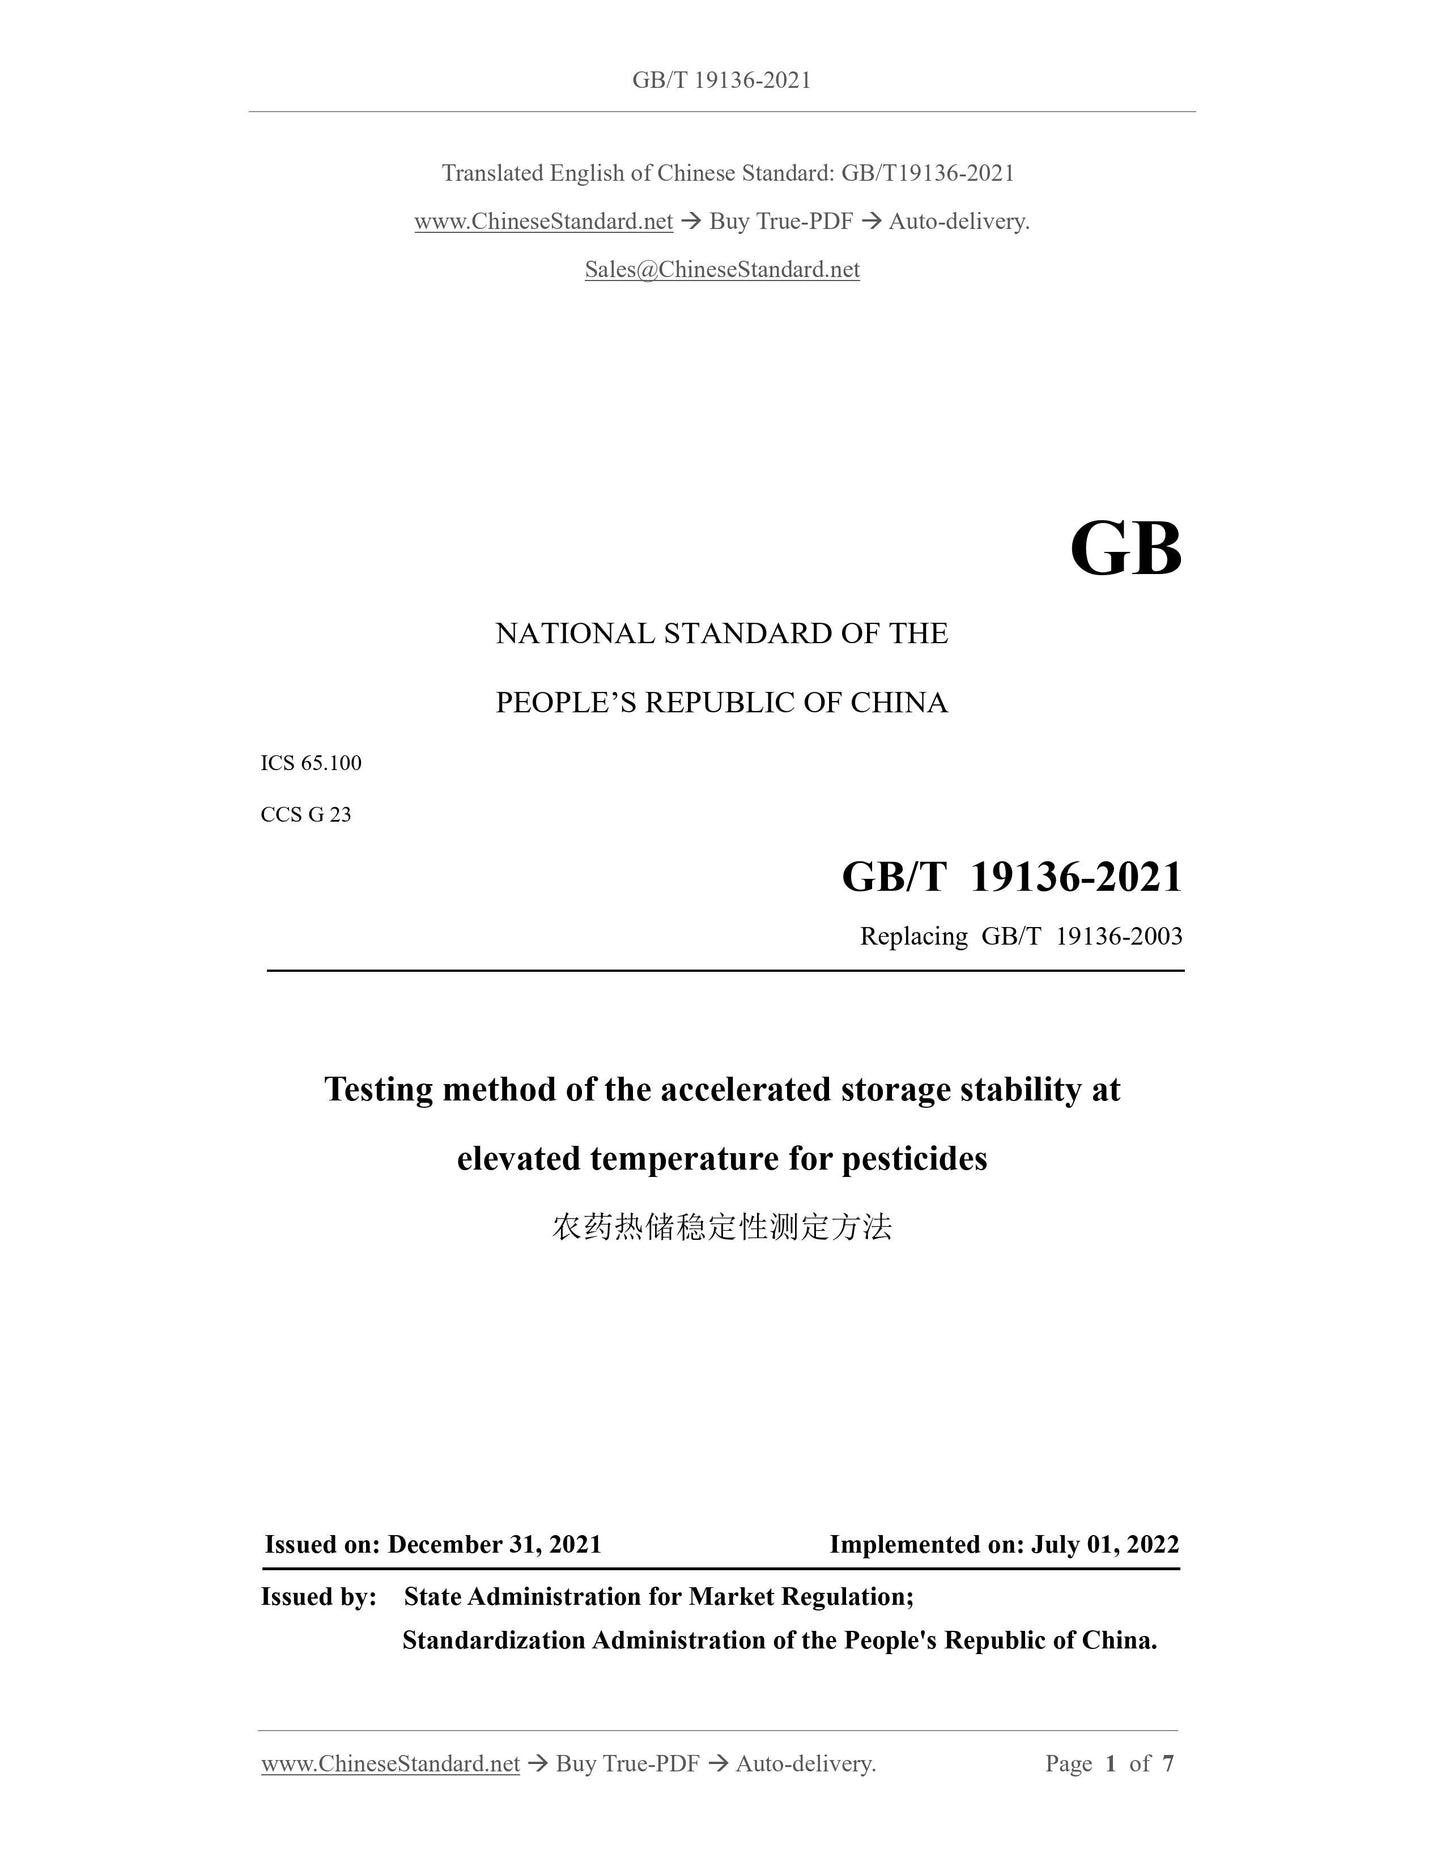 GB/T 19136-2021 Page 1